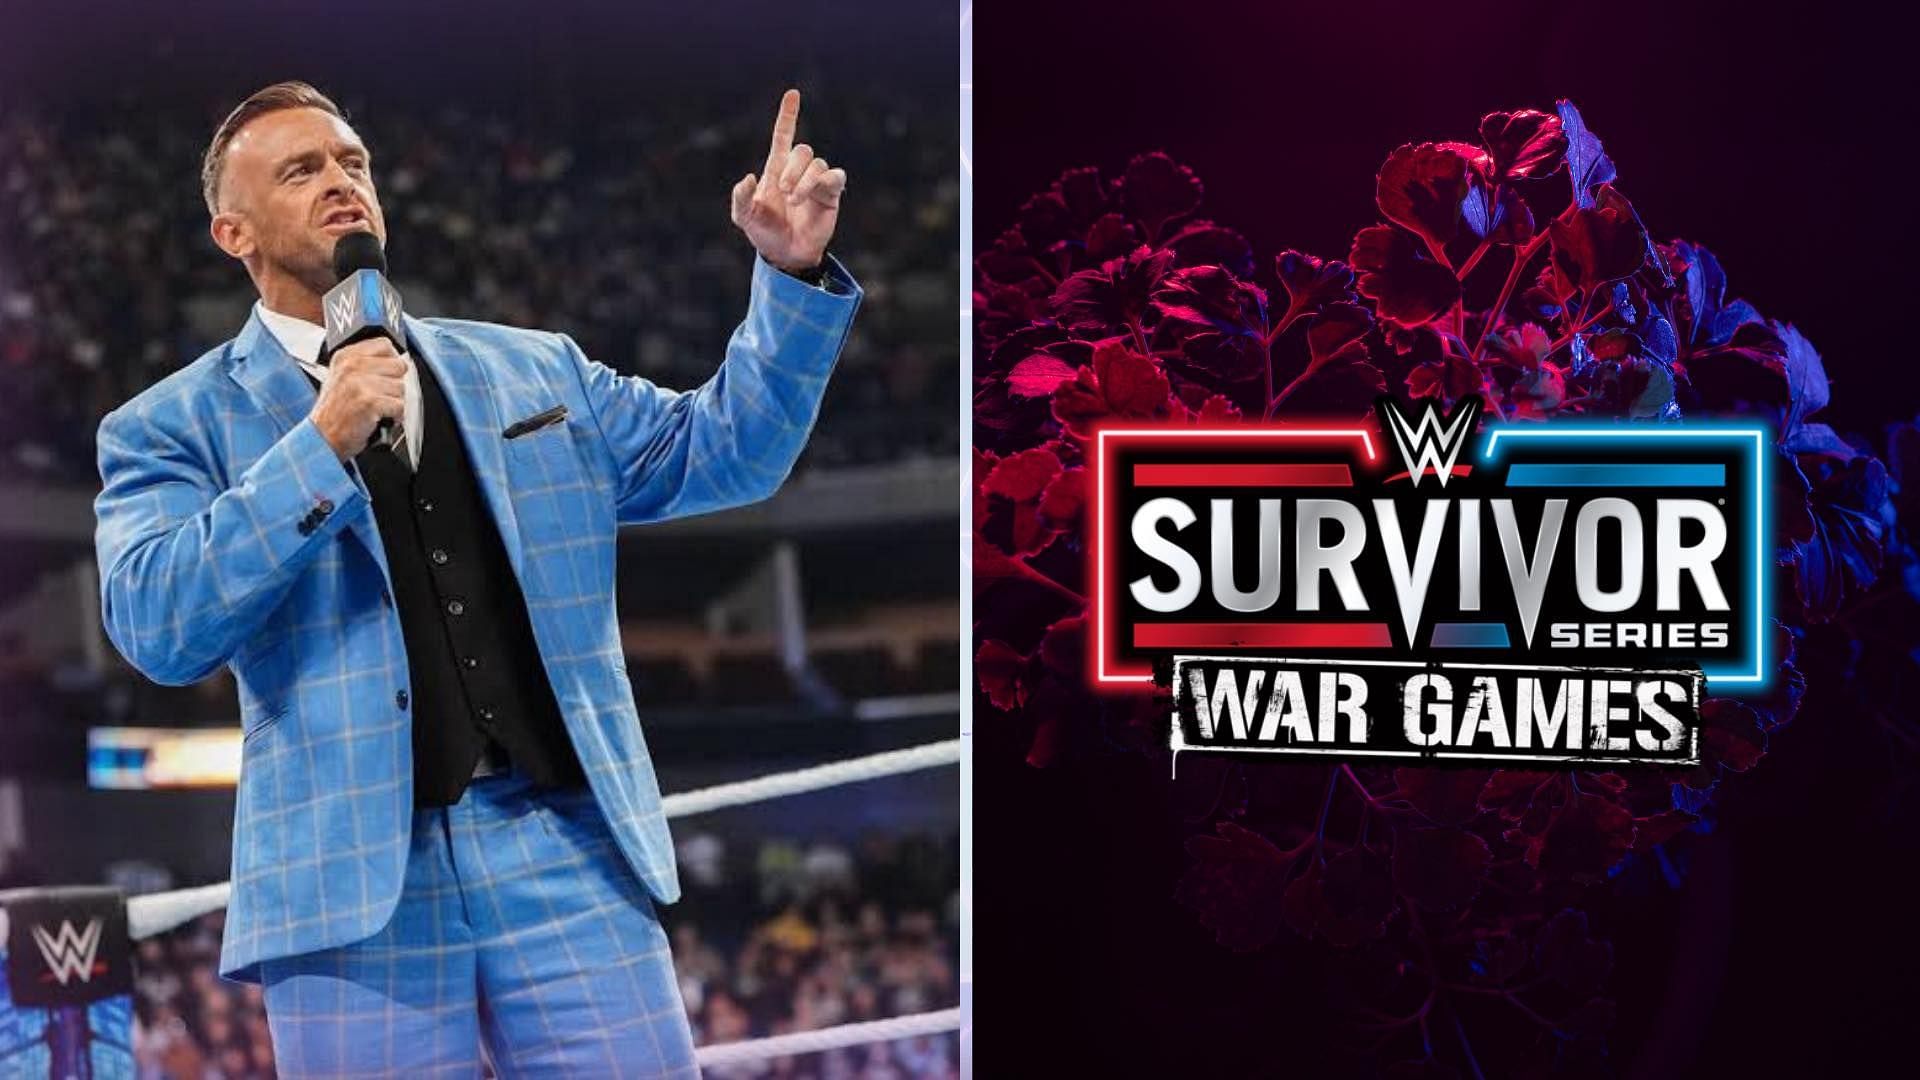 Will new SmackDown GM Nick Aldis shake things up on the way to Survivor Series?